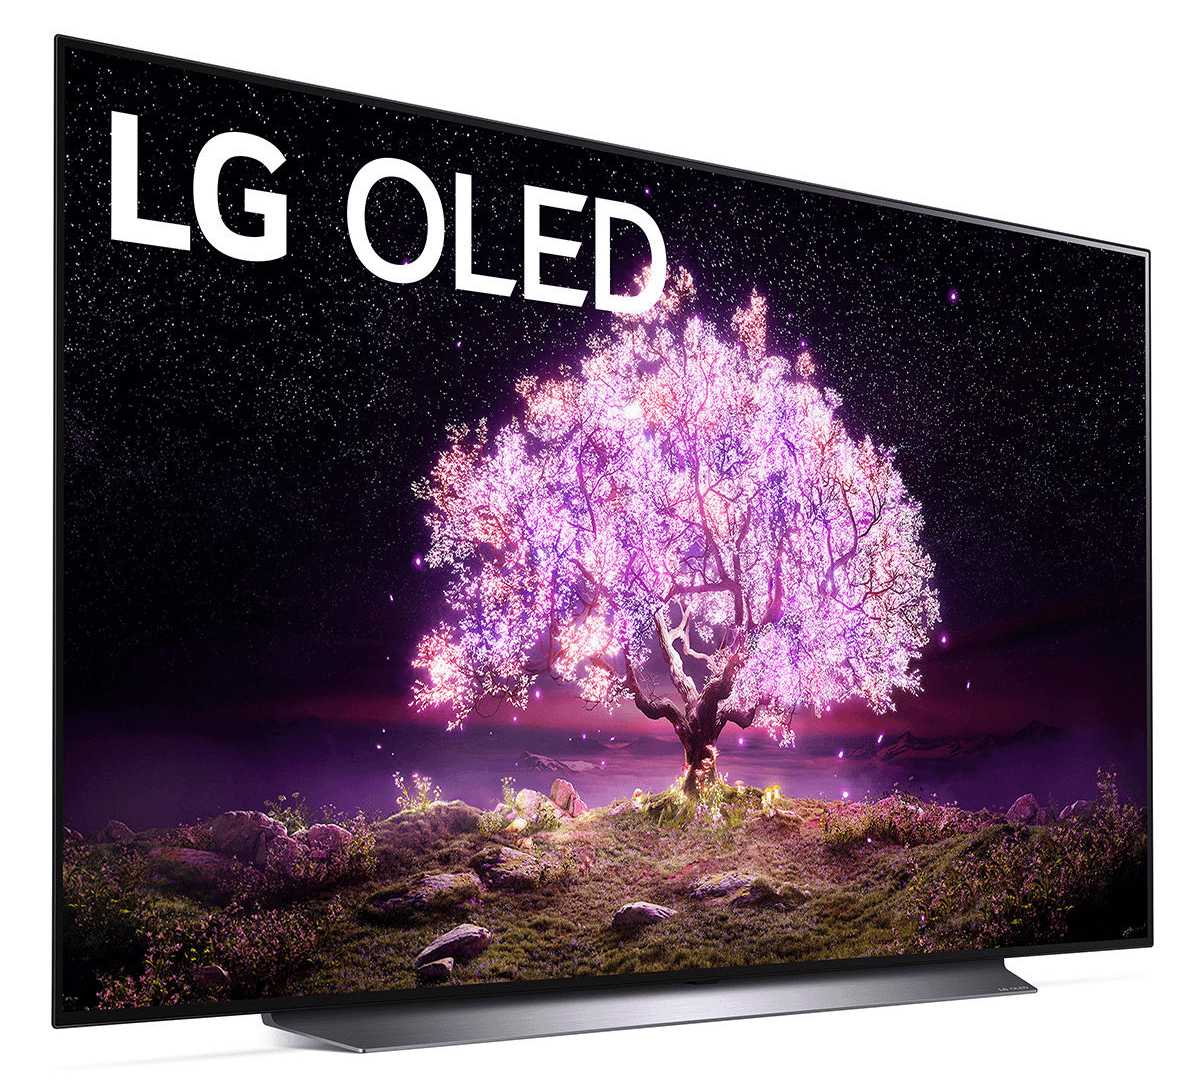 November is Black Friday Month when it comes to TV deals. If the model you want is on sale now at guaranteed Black Friday prices, should you wait? Black Friday 4K fa2c3e9c image